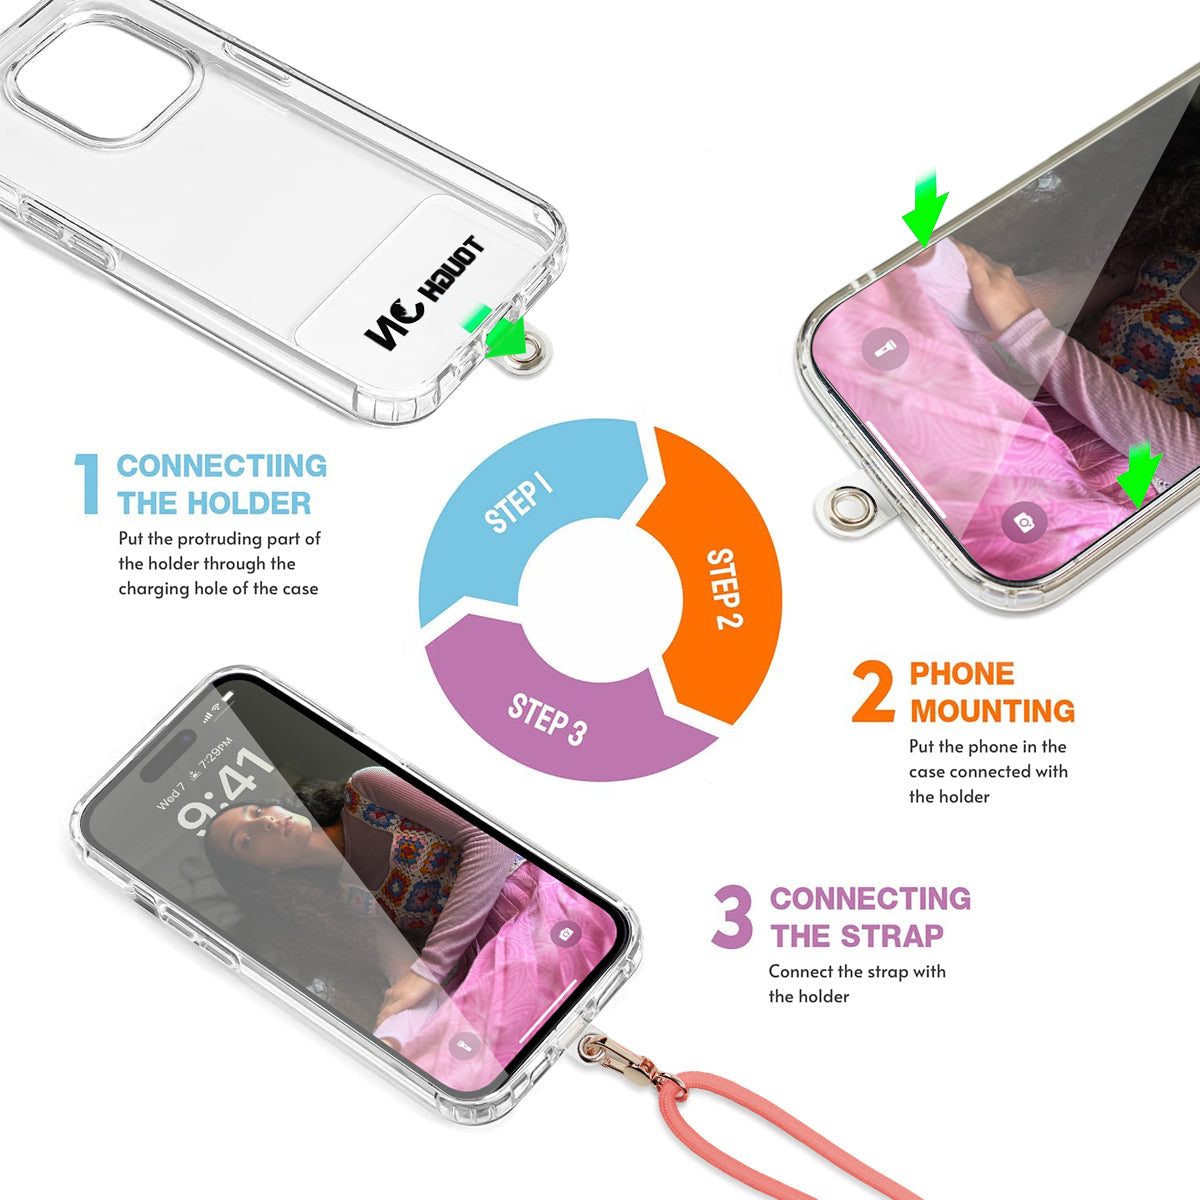 Tough On CrossBody Rope Phone Strap with Card Pink